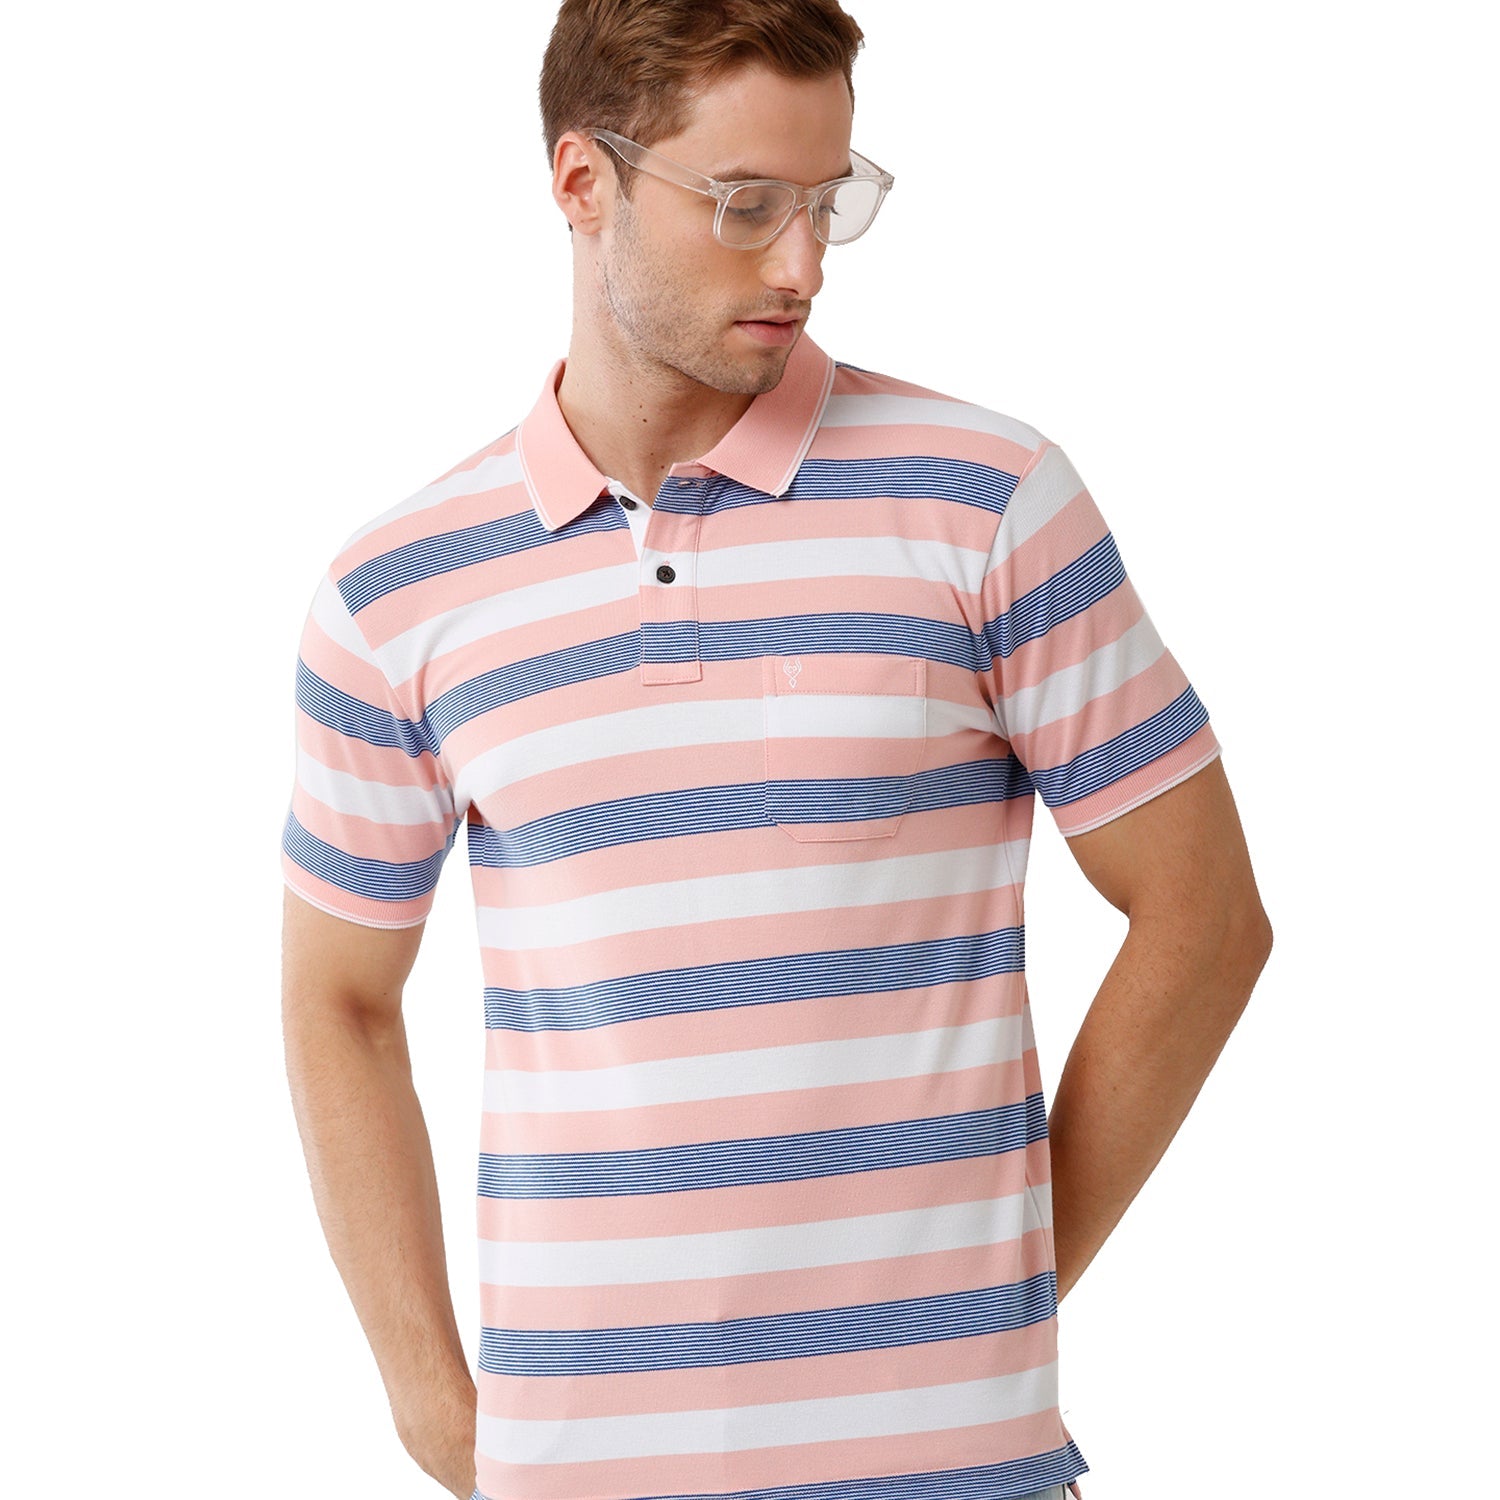 Classic Polo Cotton Striped Pink & Blue Slim Fit Polo Neck T-Shirt Adore - 163 B T-shirt Classic Polo 